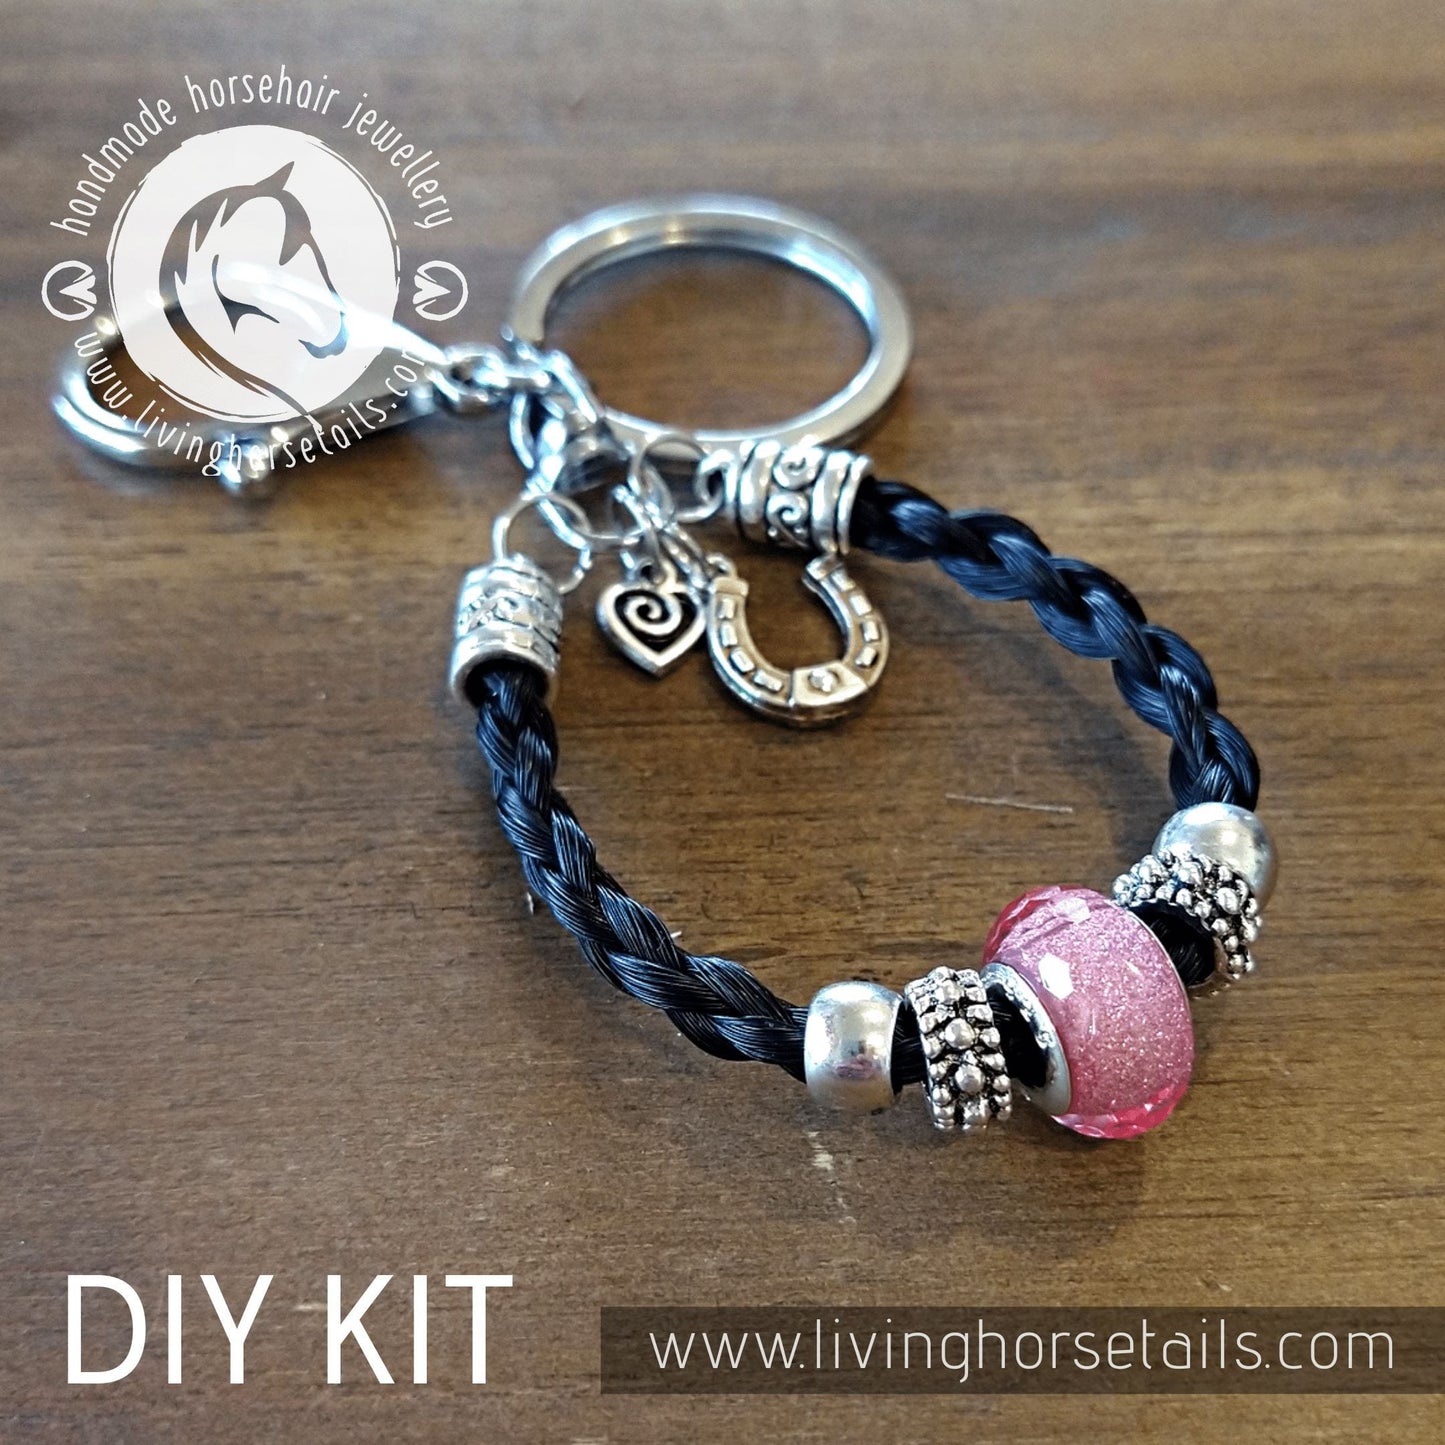 Load image into Gallery viewer, DIY KIT Keyring with acrylic glitter bead. Make your own with Horse tail hair. Bracelet Living Horse Tails Handmade Jewellery Custom Horse Hair Keepsakes Australia
